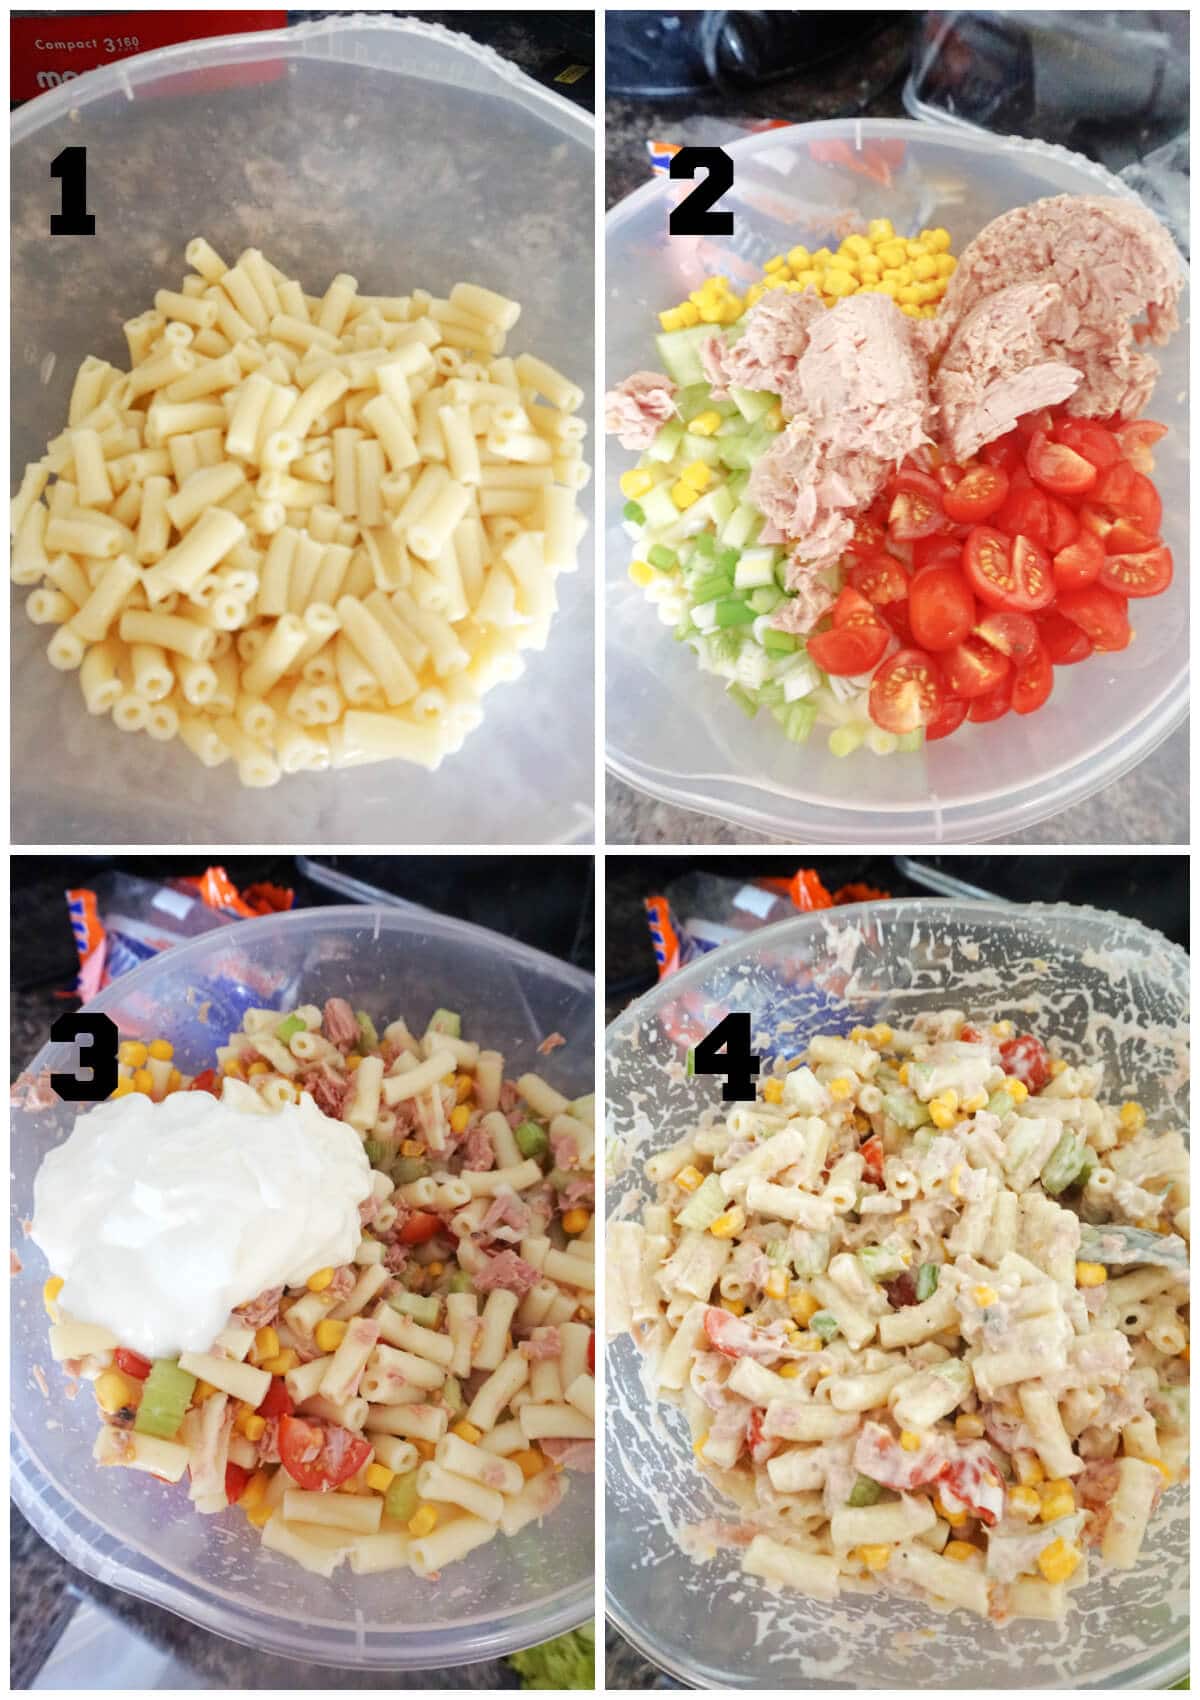 Collage of 4 photos to show how to make tuna pasta salad.